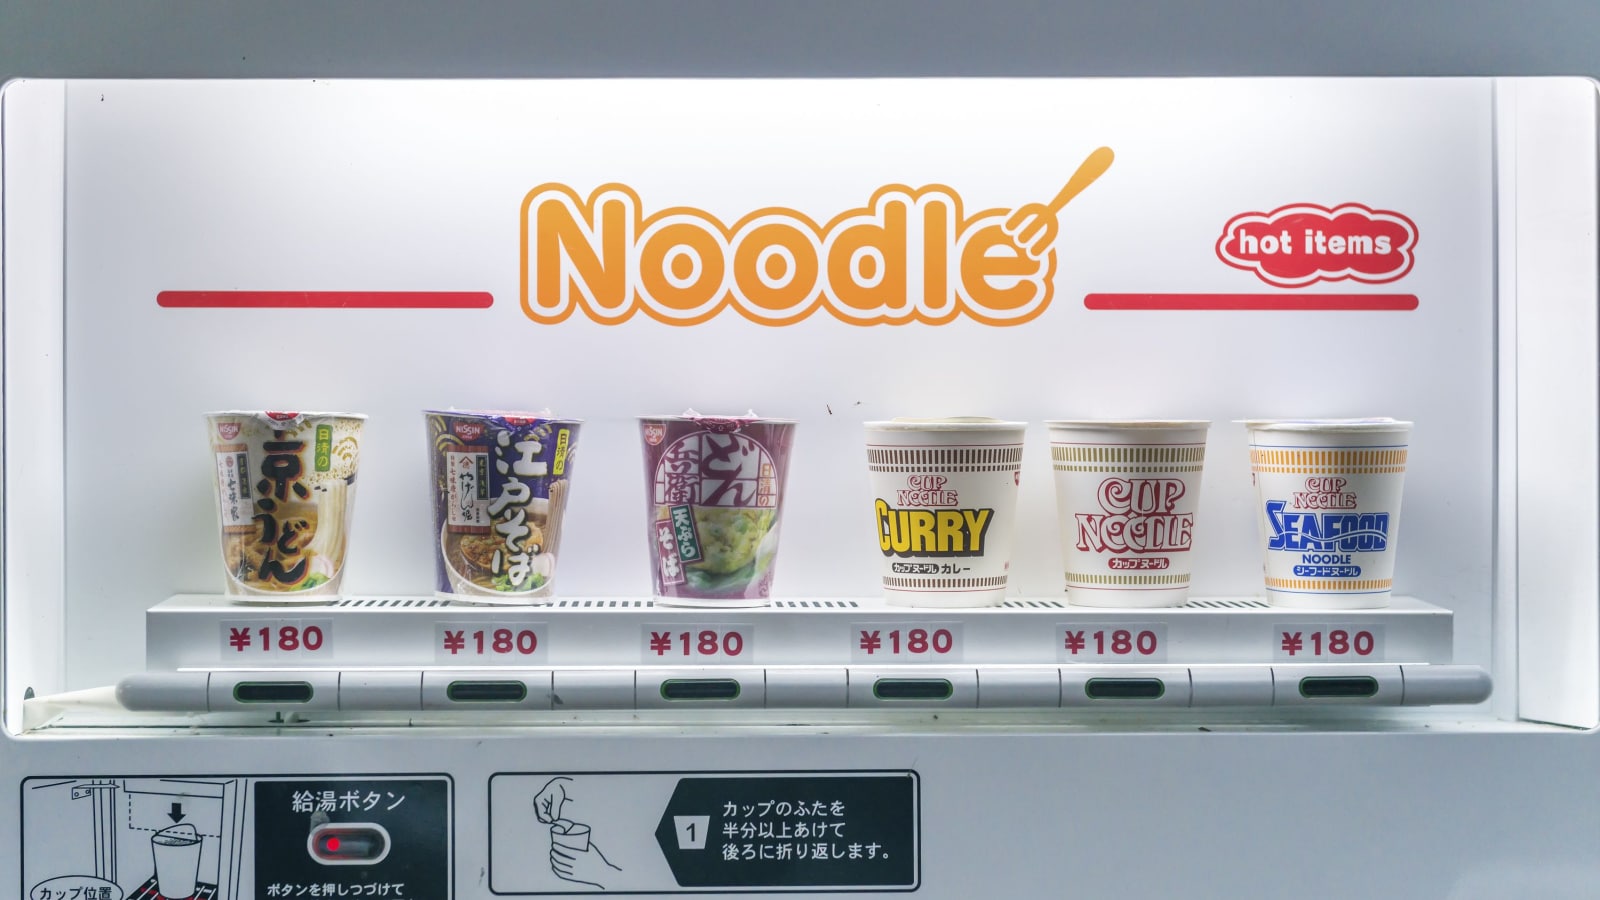 HAKONE, JAPAN - AUGUST 8: A line of cup noodles on display for purchase in a vending machine shown on August 8, 2015 in Hakone, Japan